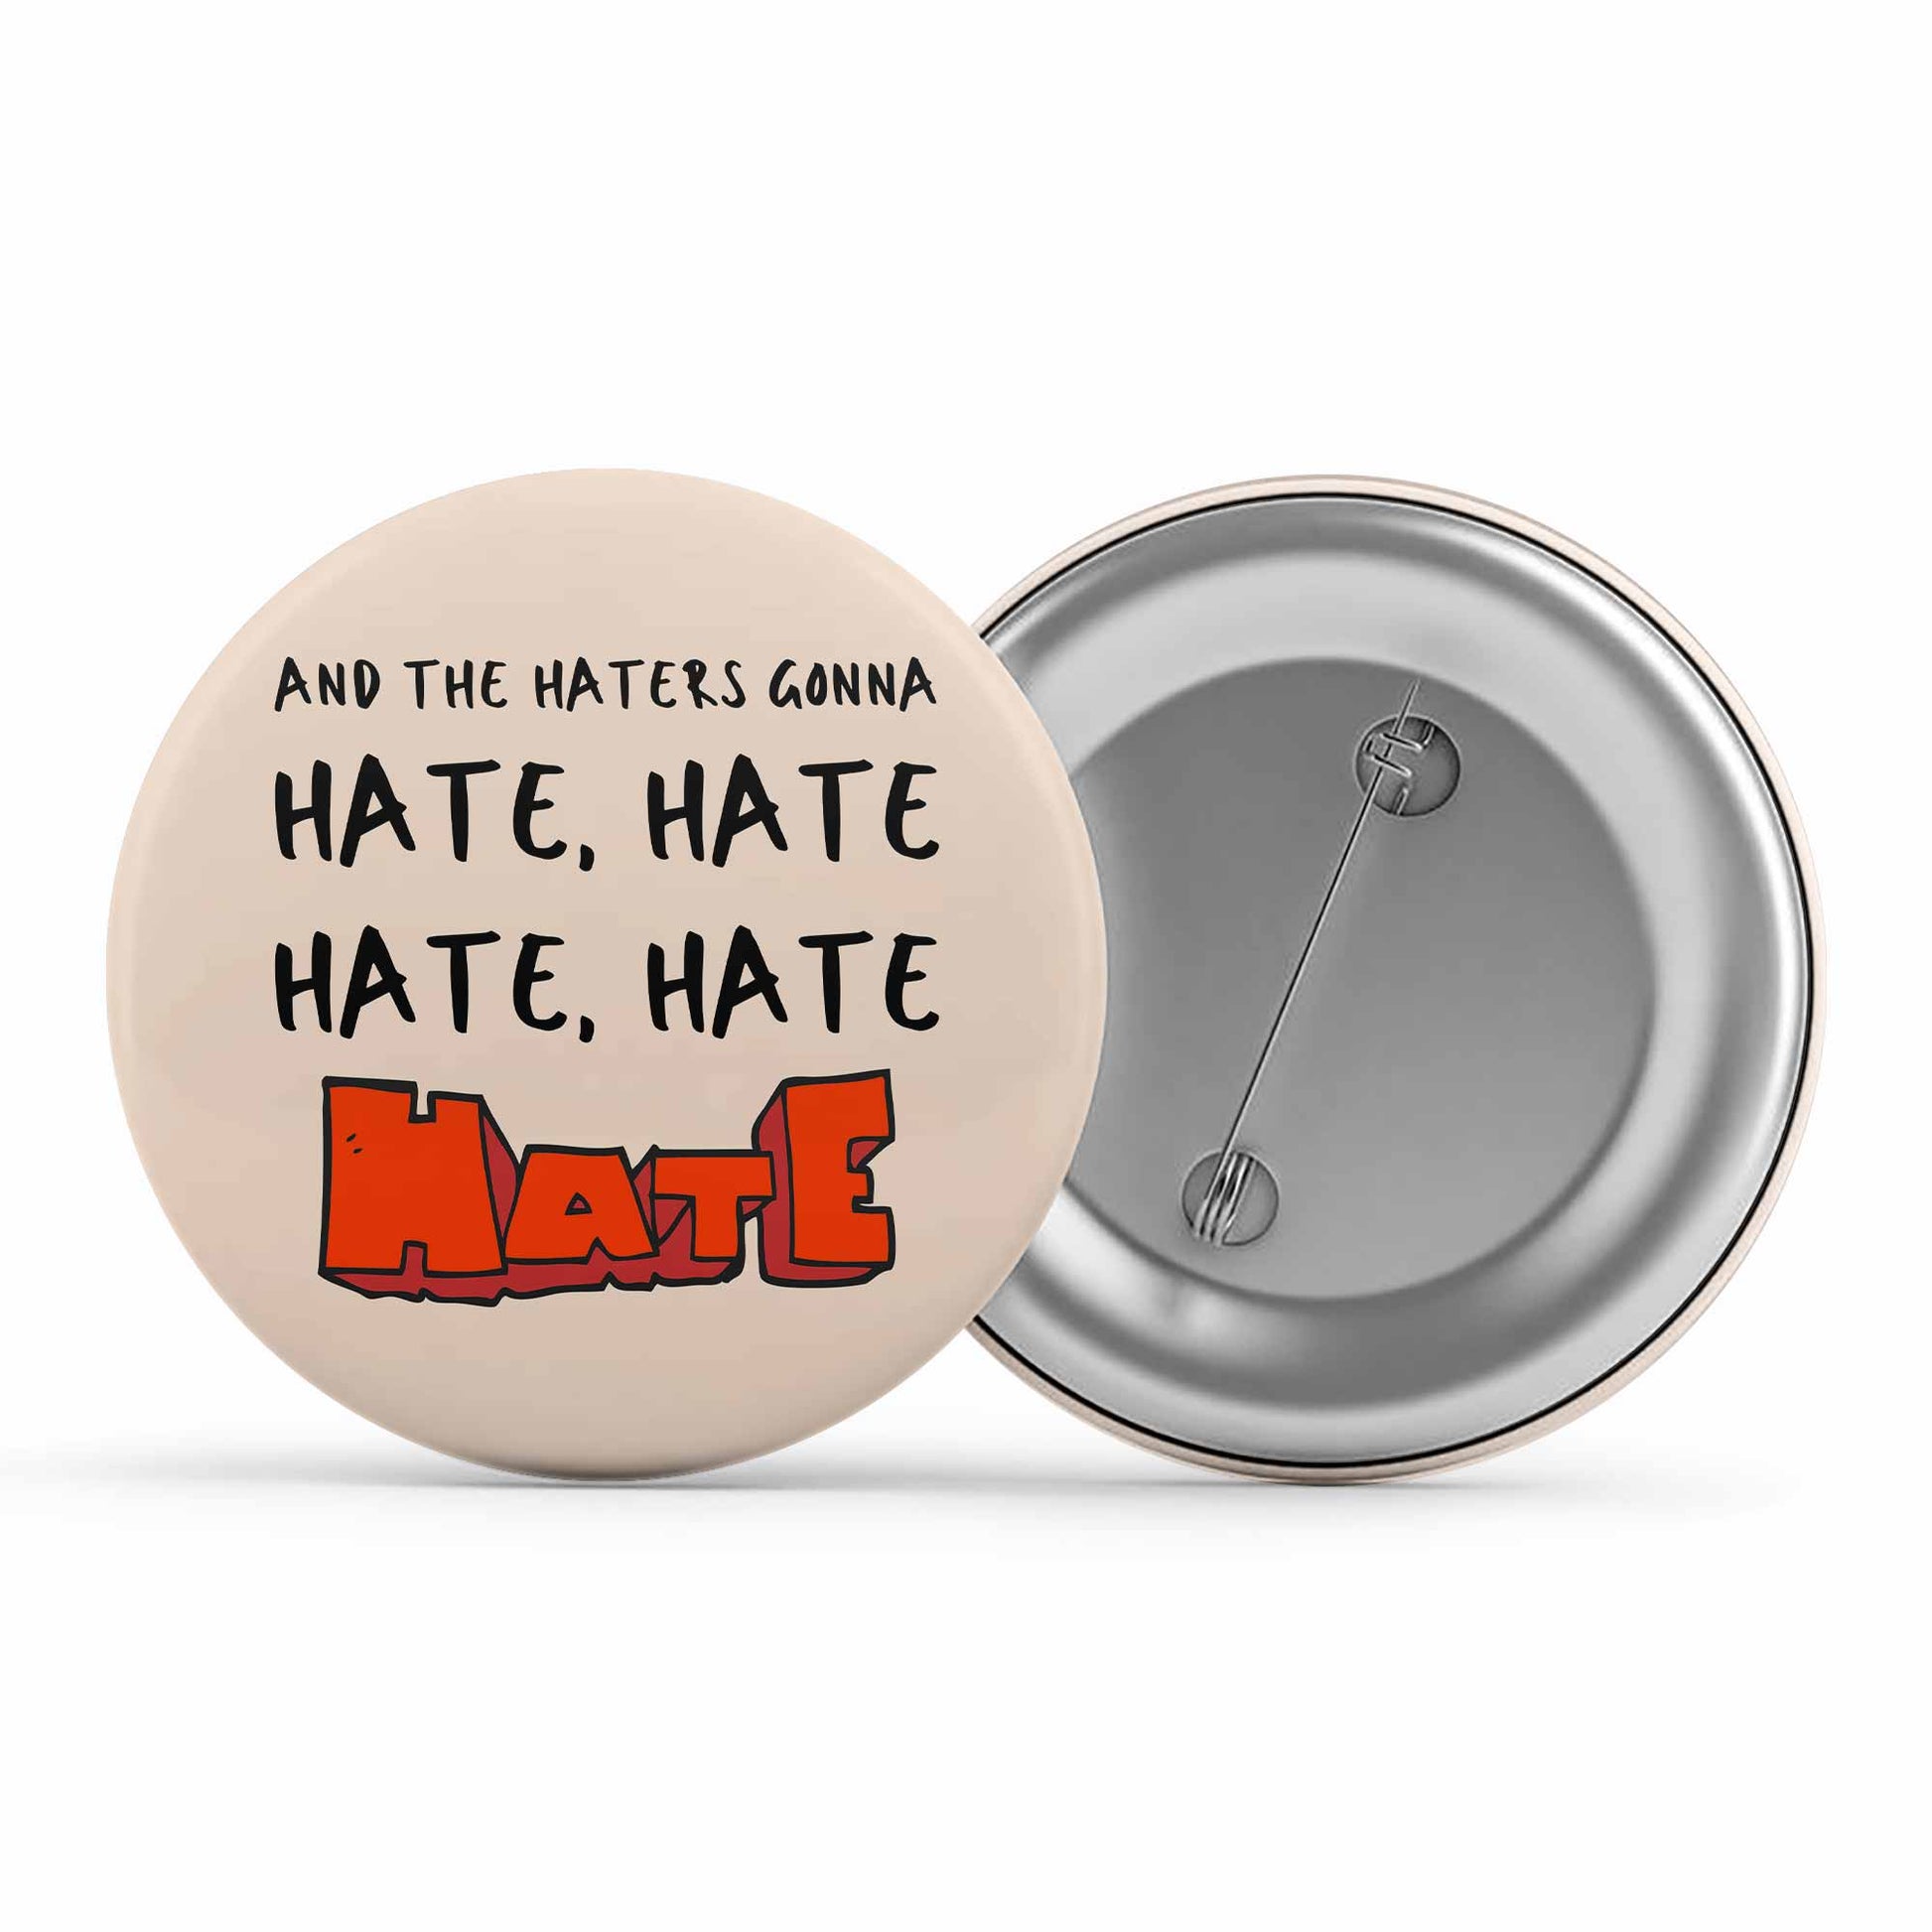 taylor swift haters gonna hate badge pin button music band buy online india the banyan tee tbt men women girls boys unisex  